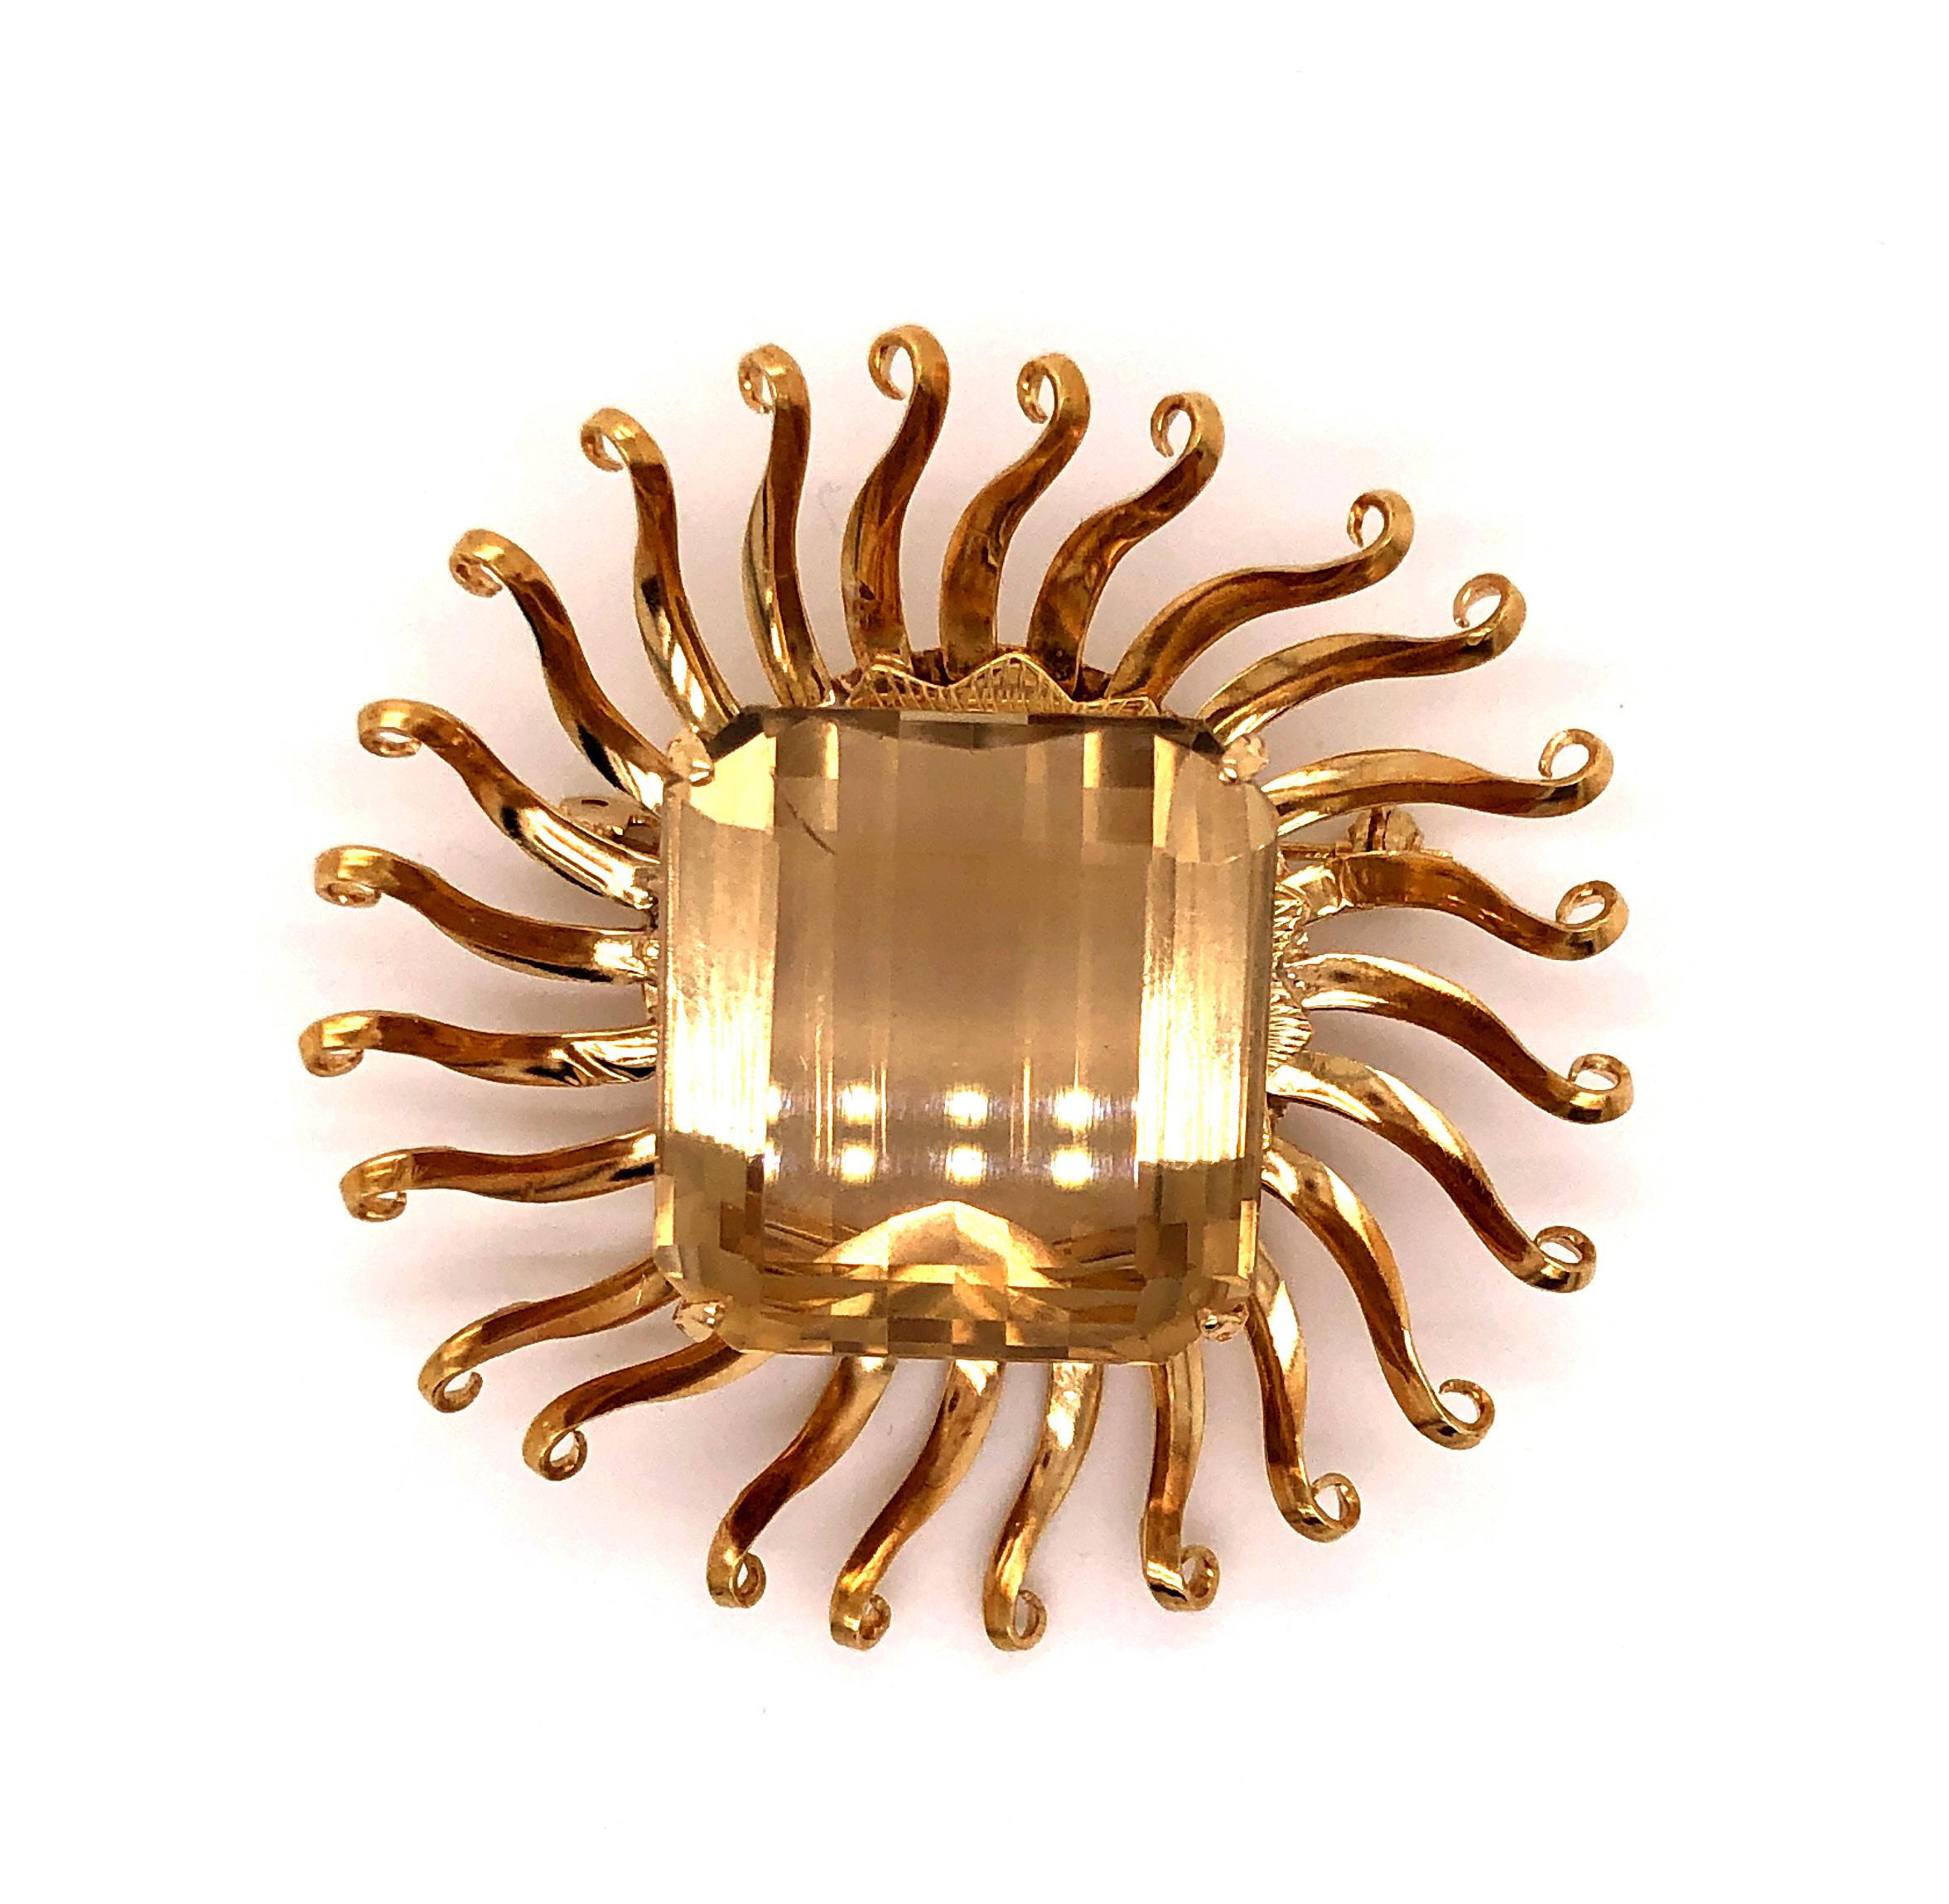 Three dimensional 18k yellow gold sun brooch featuring a centrally set faceted square shaped yellow topaz with gold rays of light bursting outwards.
Marked 18k.